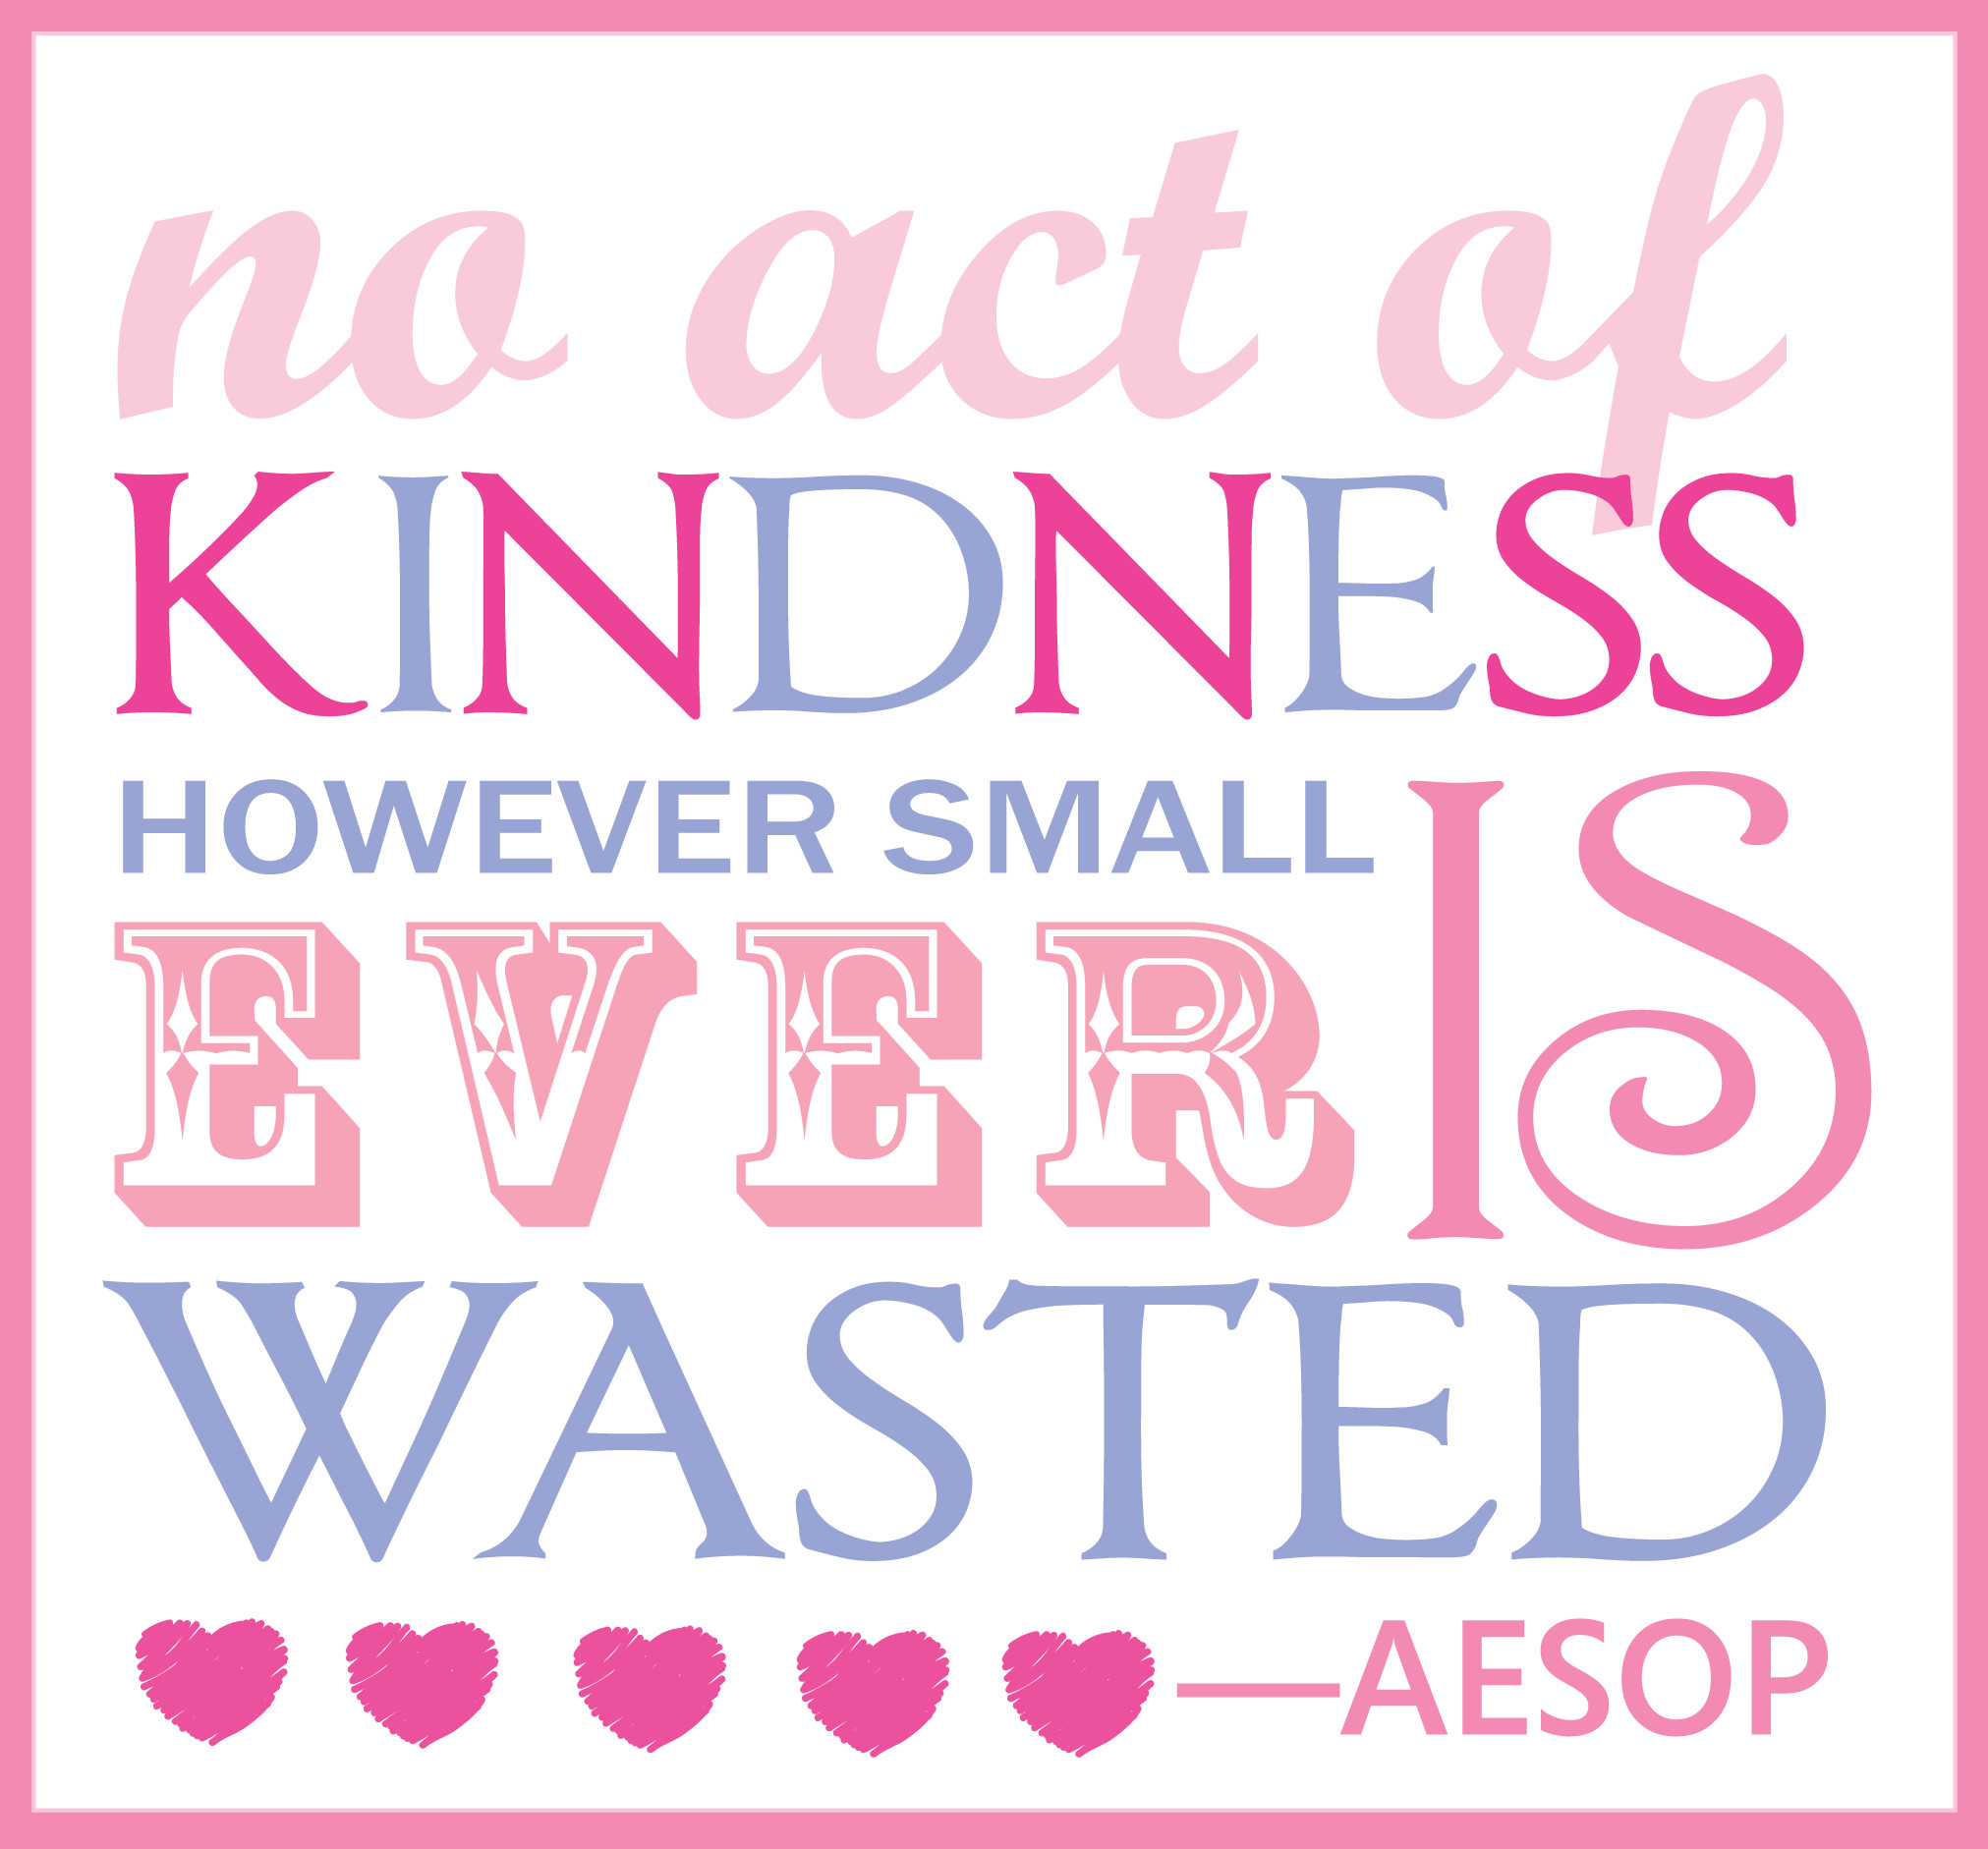 Random Acts Of Kindness Quotes
 10 Random Acts of Kindness